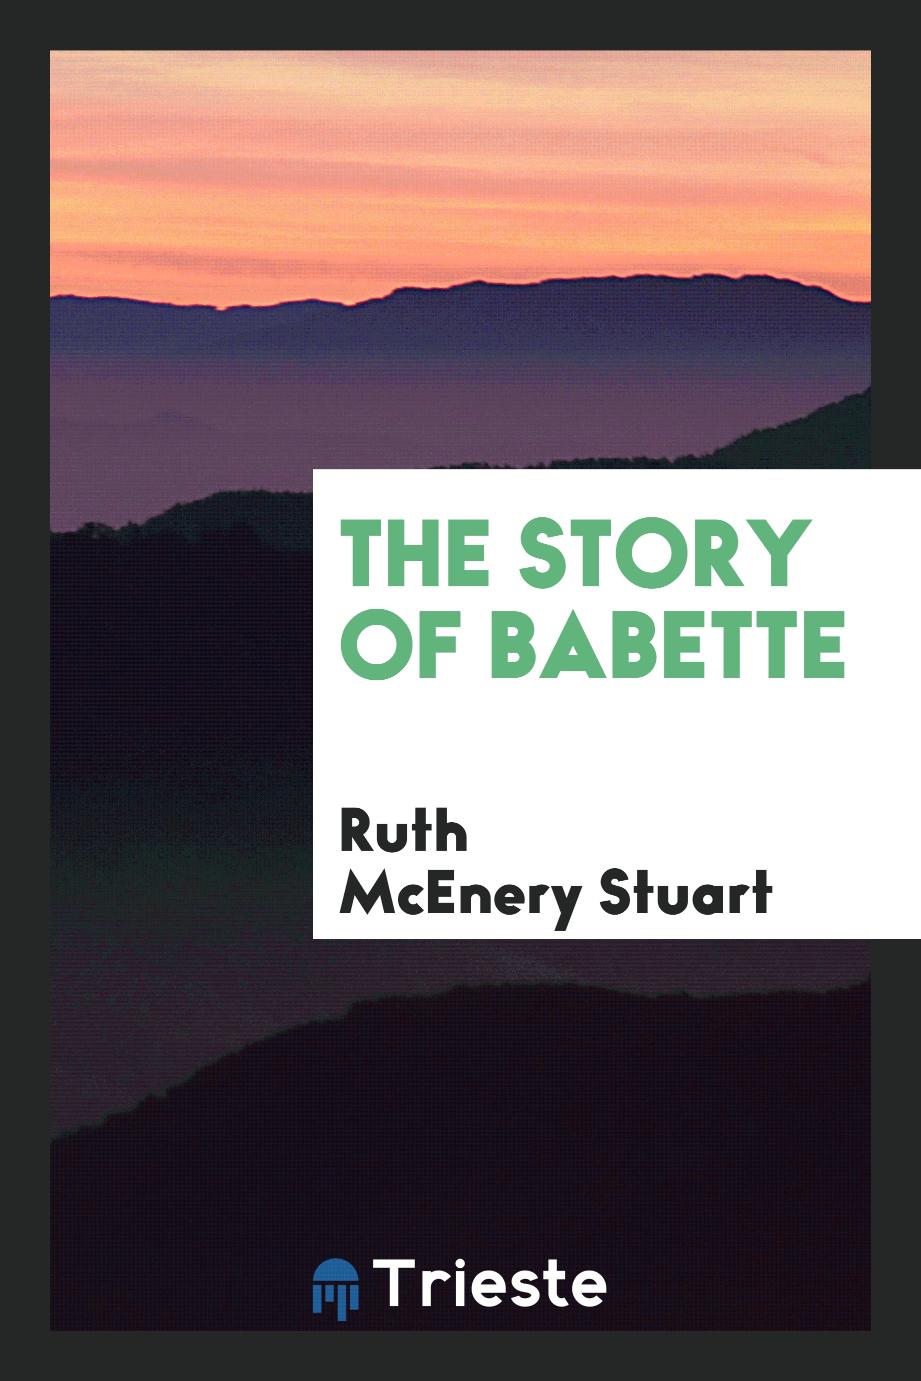 The story of Babette